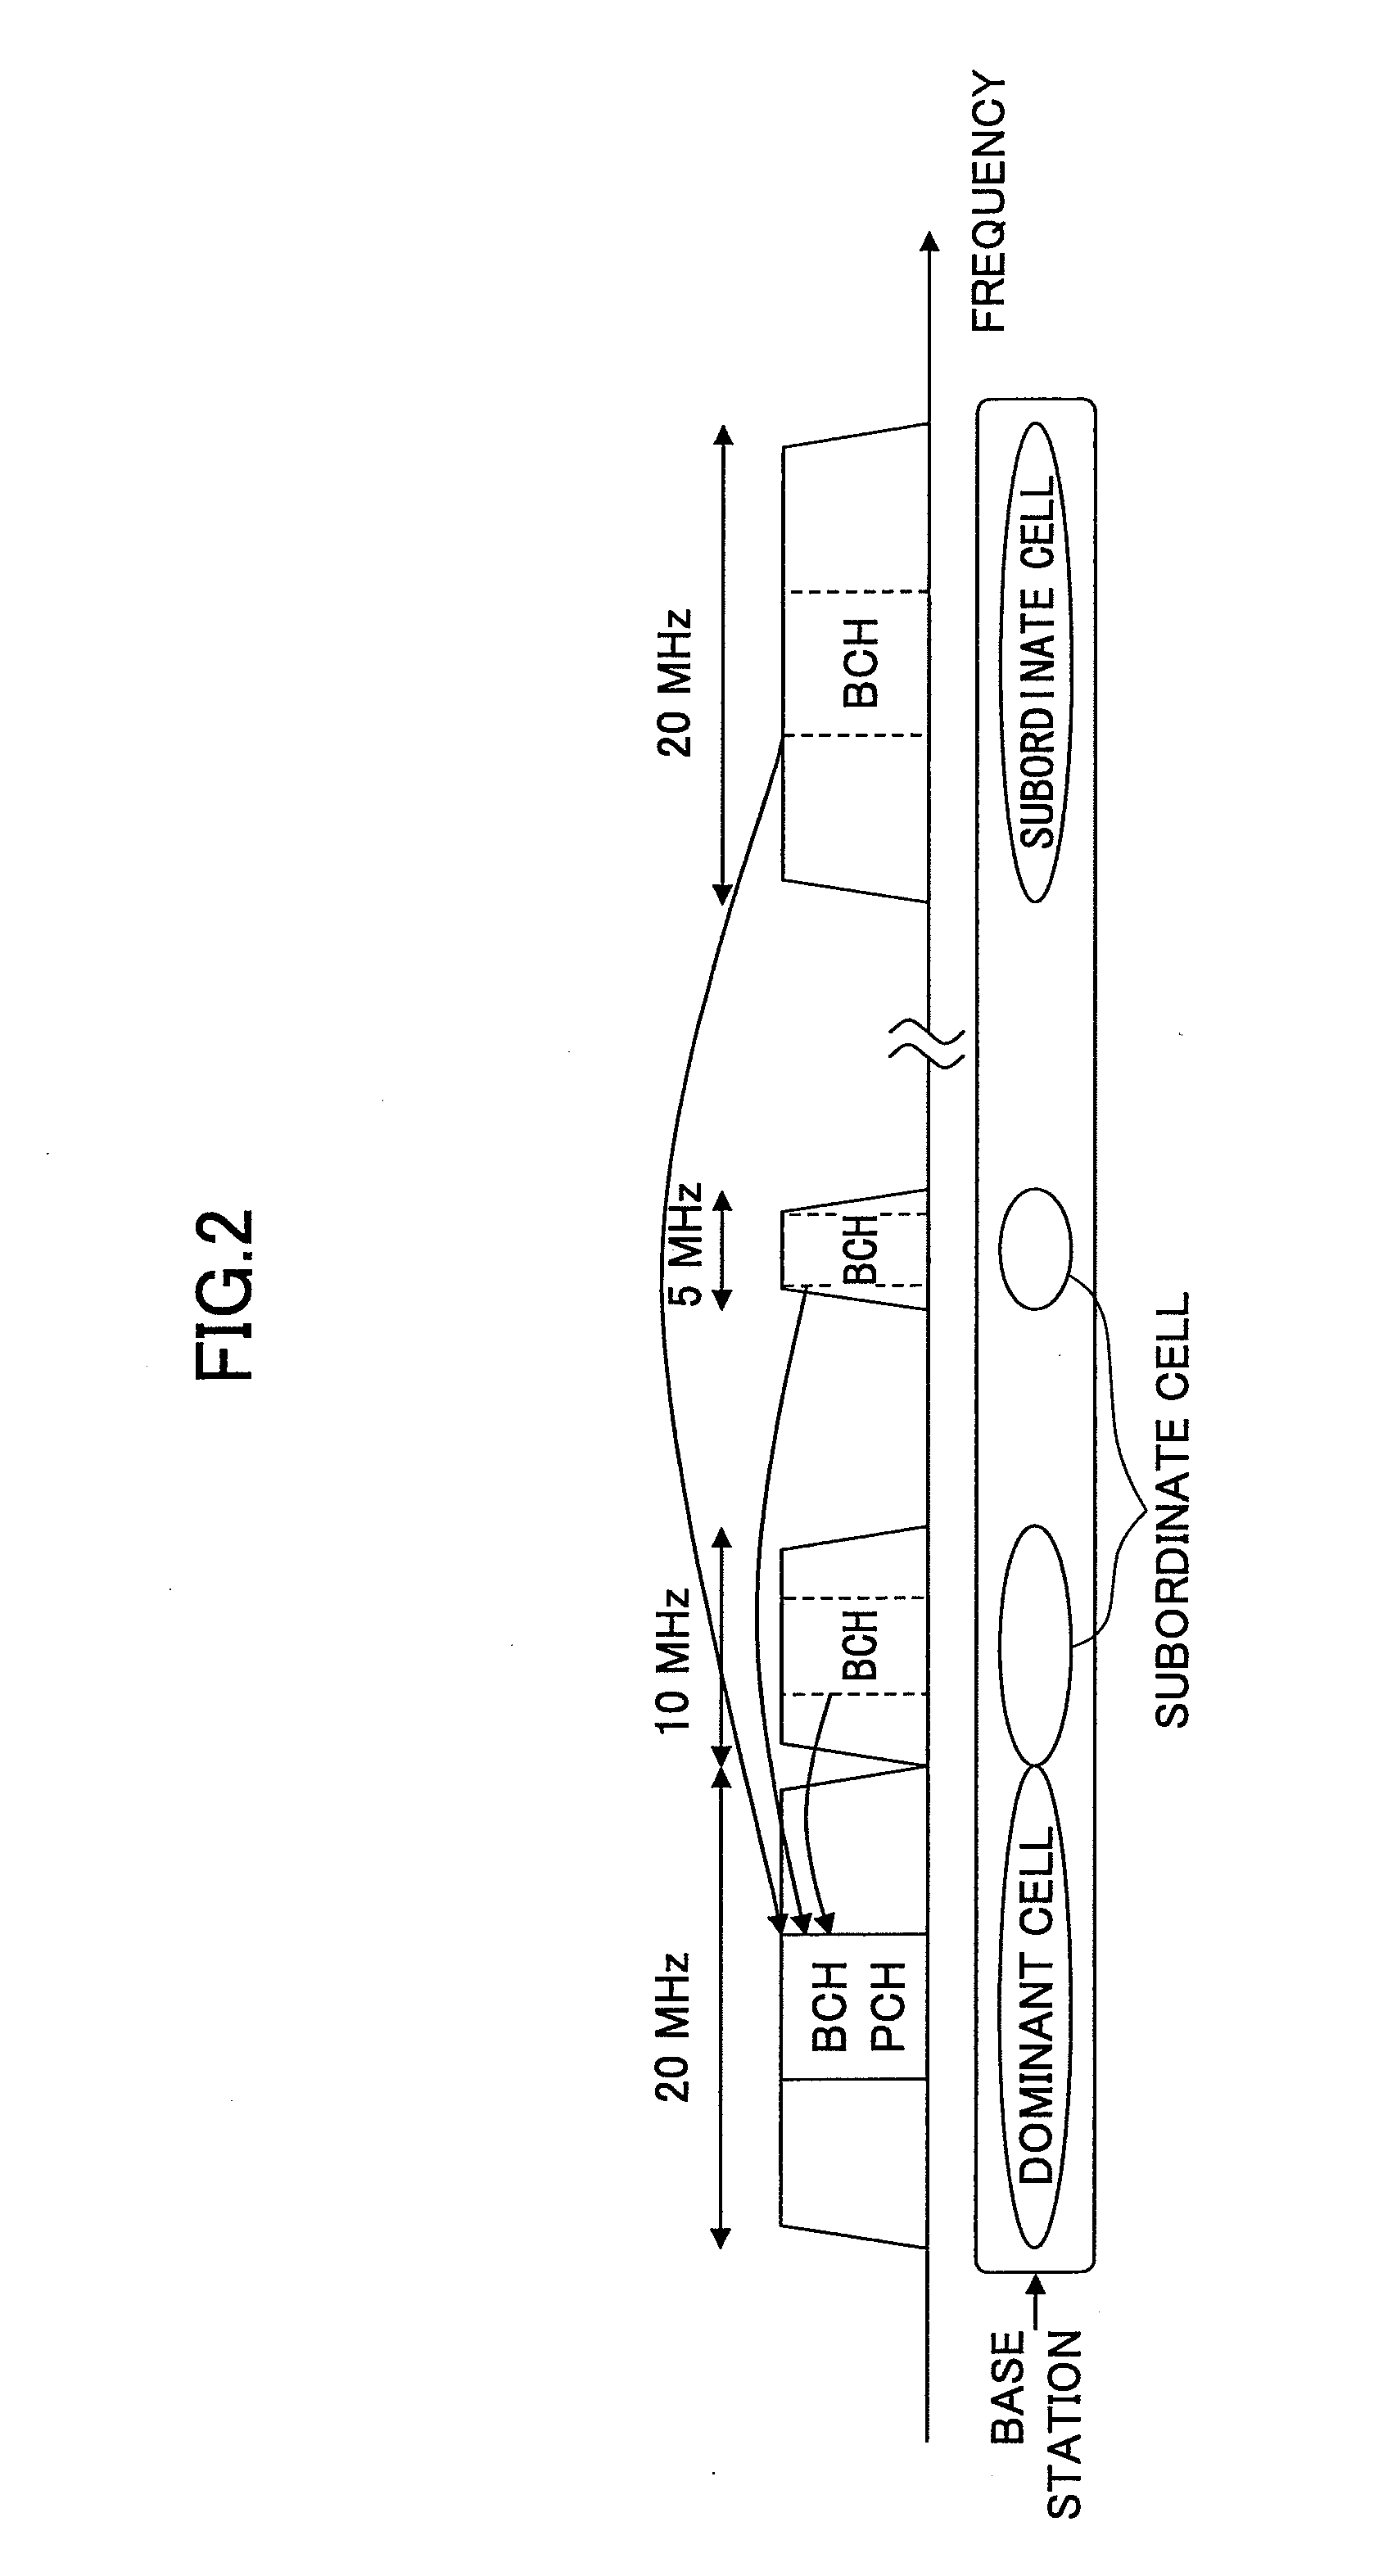 Base station, mobile station, and cell determination method